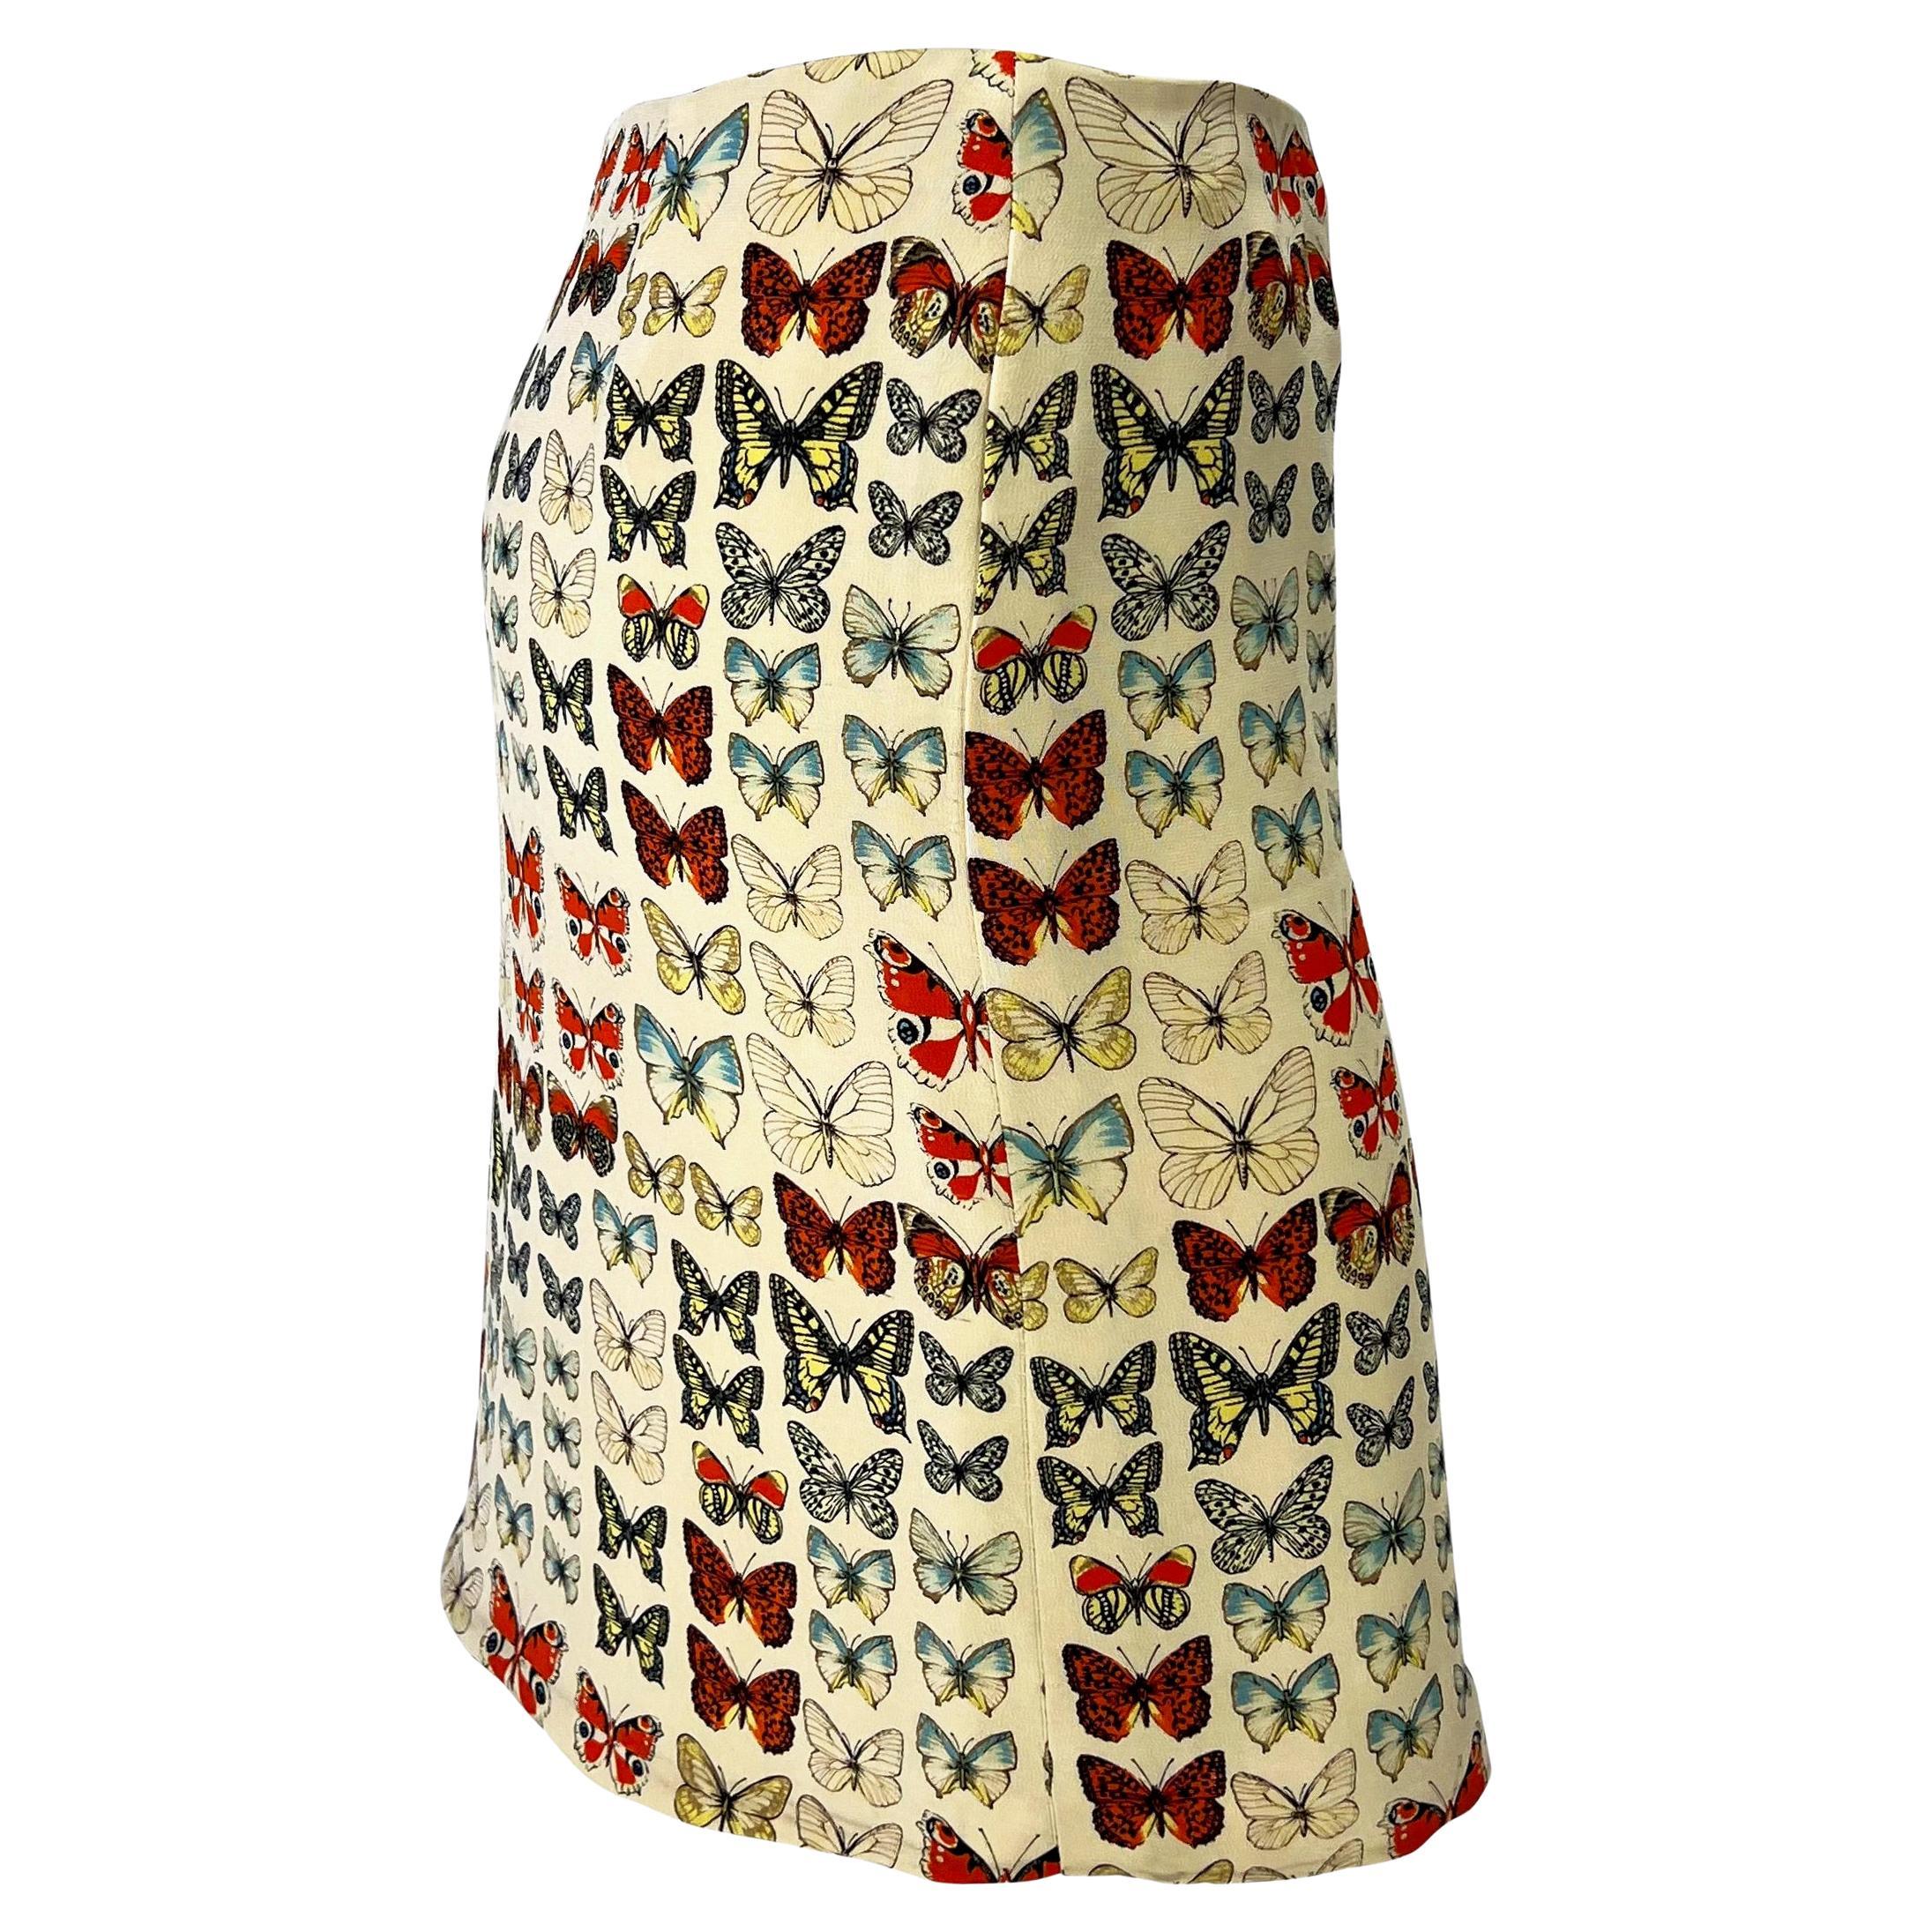 S/S 1995 Gianni Versace Couture Butterfly Moth Print Cream Mini Skirt For Sale 1